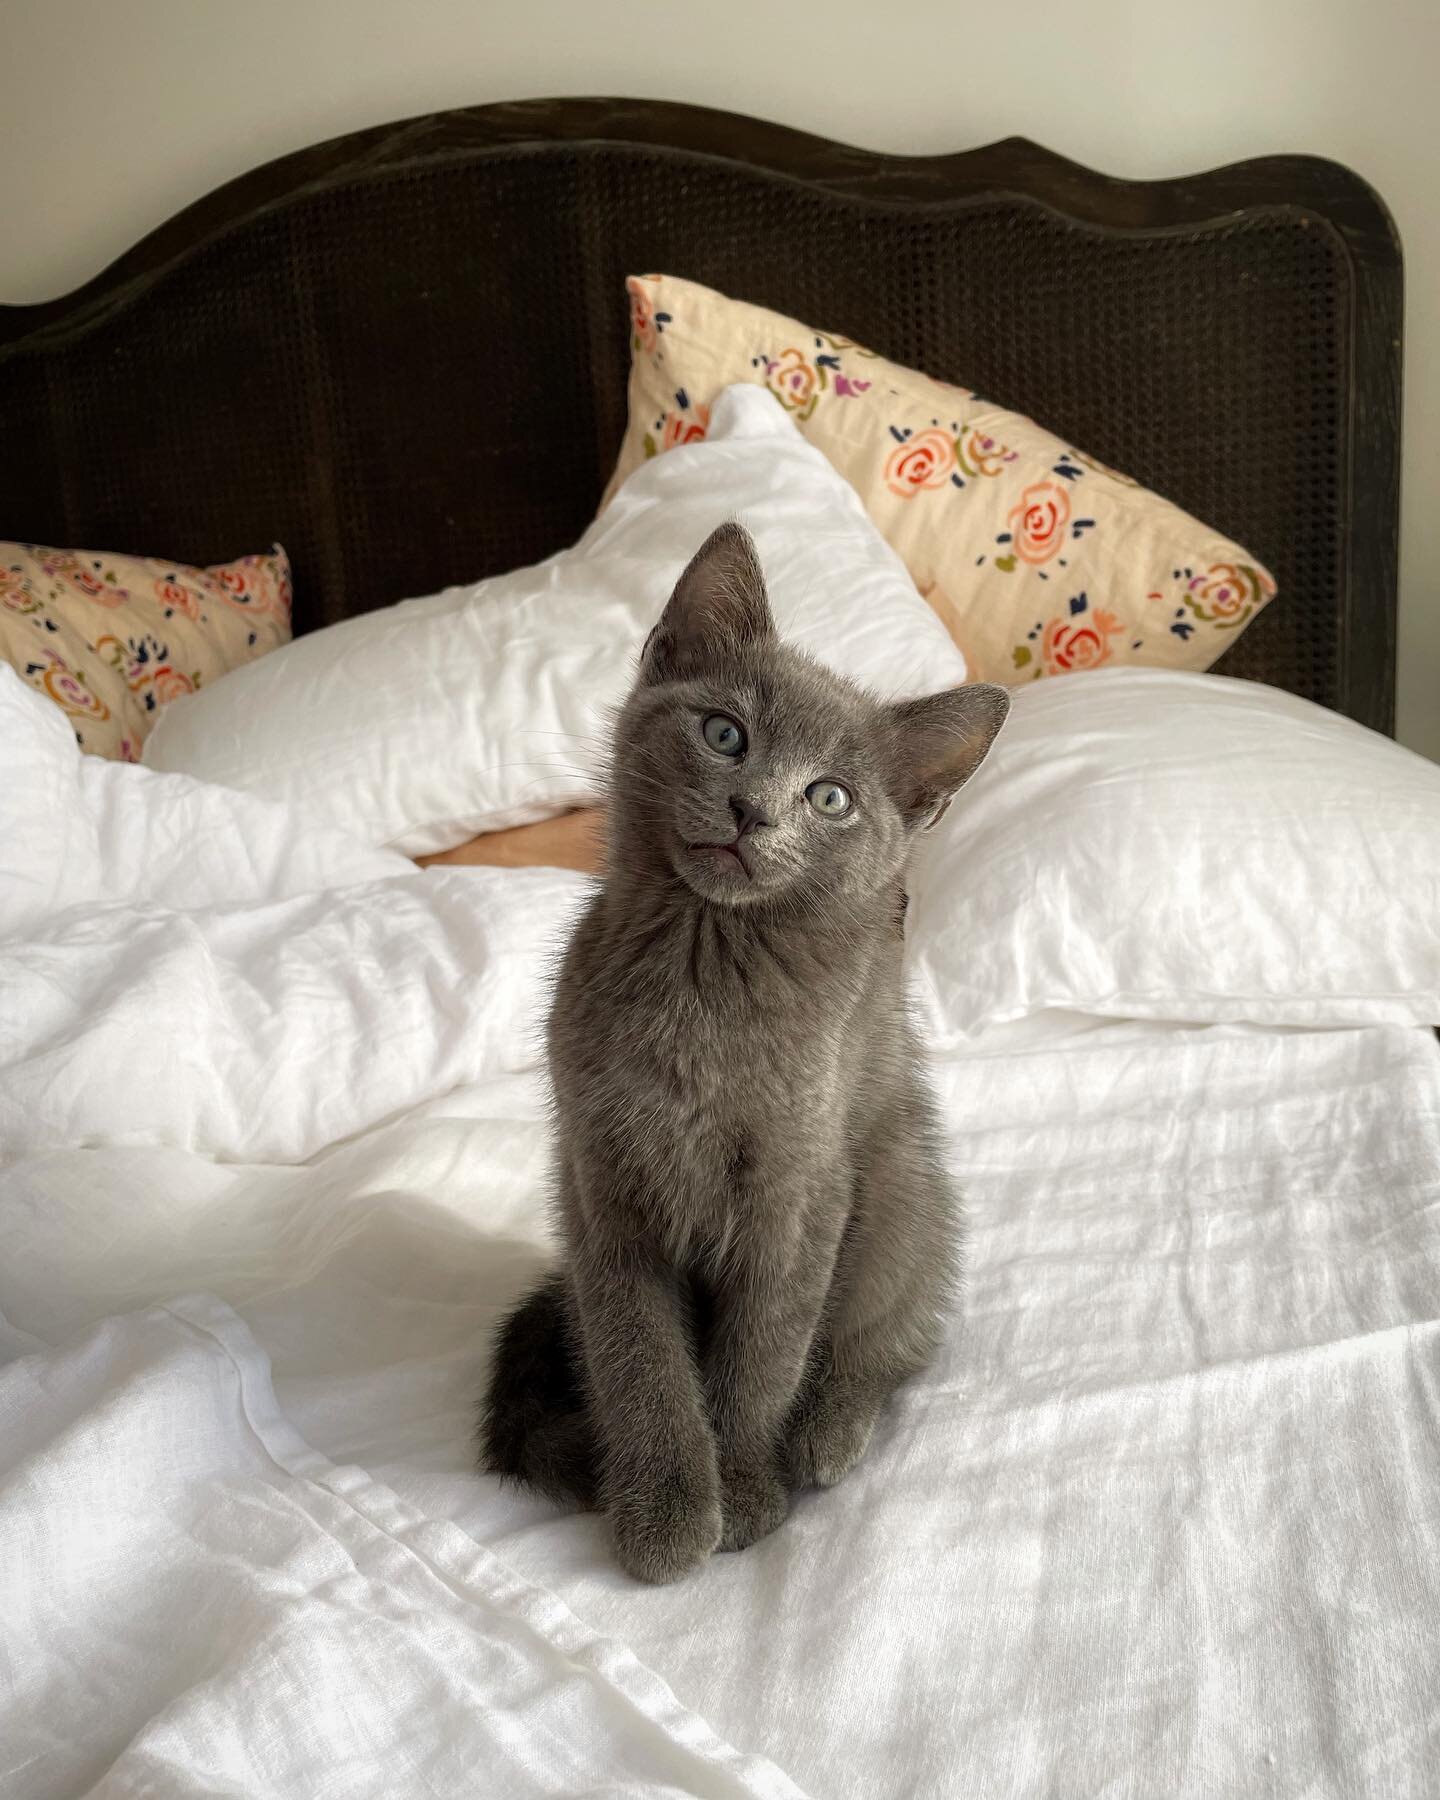 Meet Basil. A 10 week old kitten that found his way into our hearts and home.

#russianblue